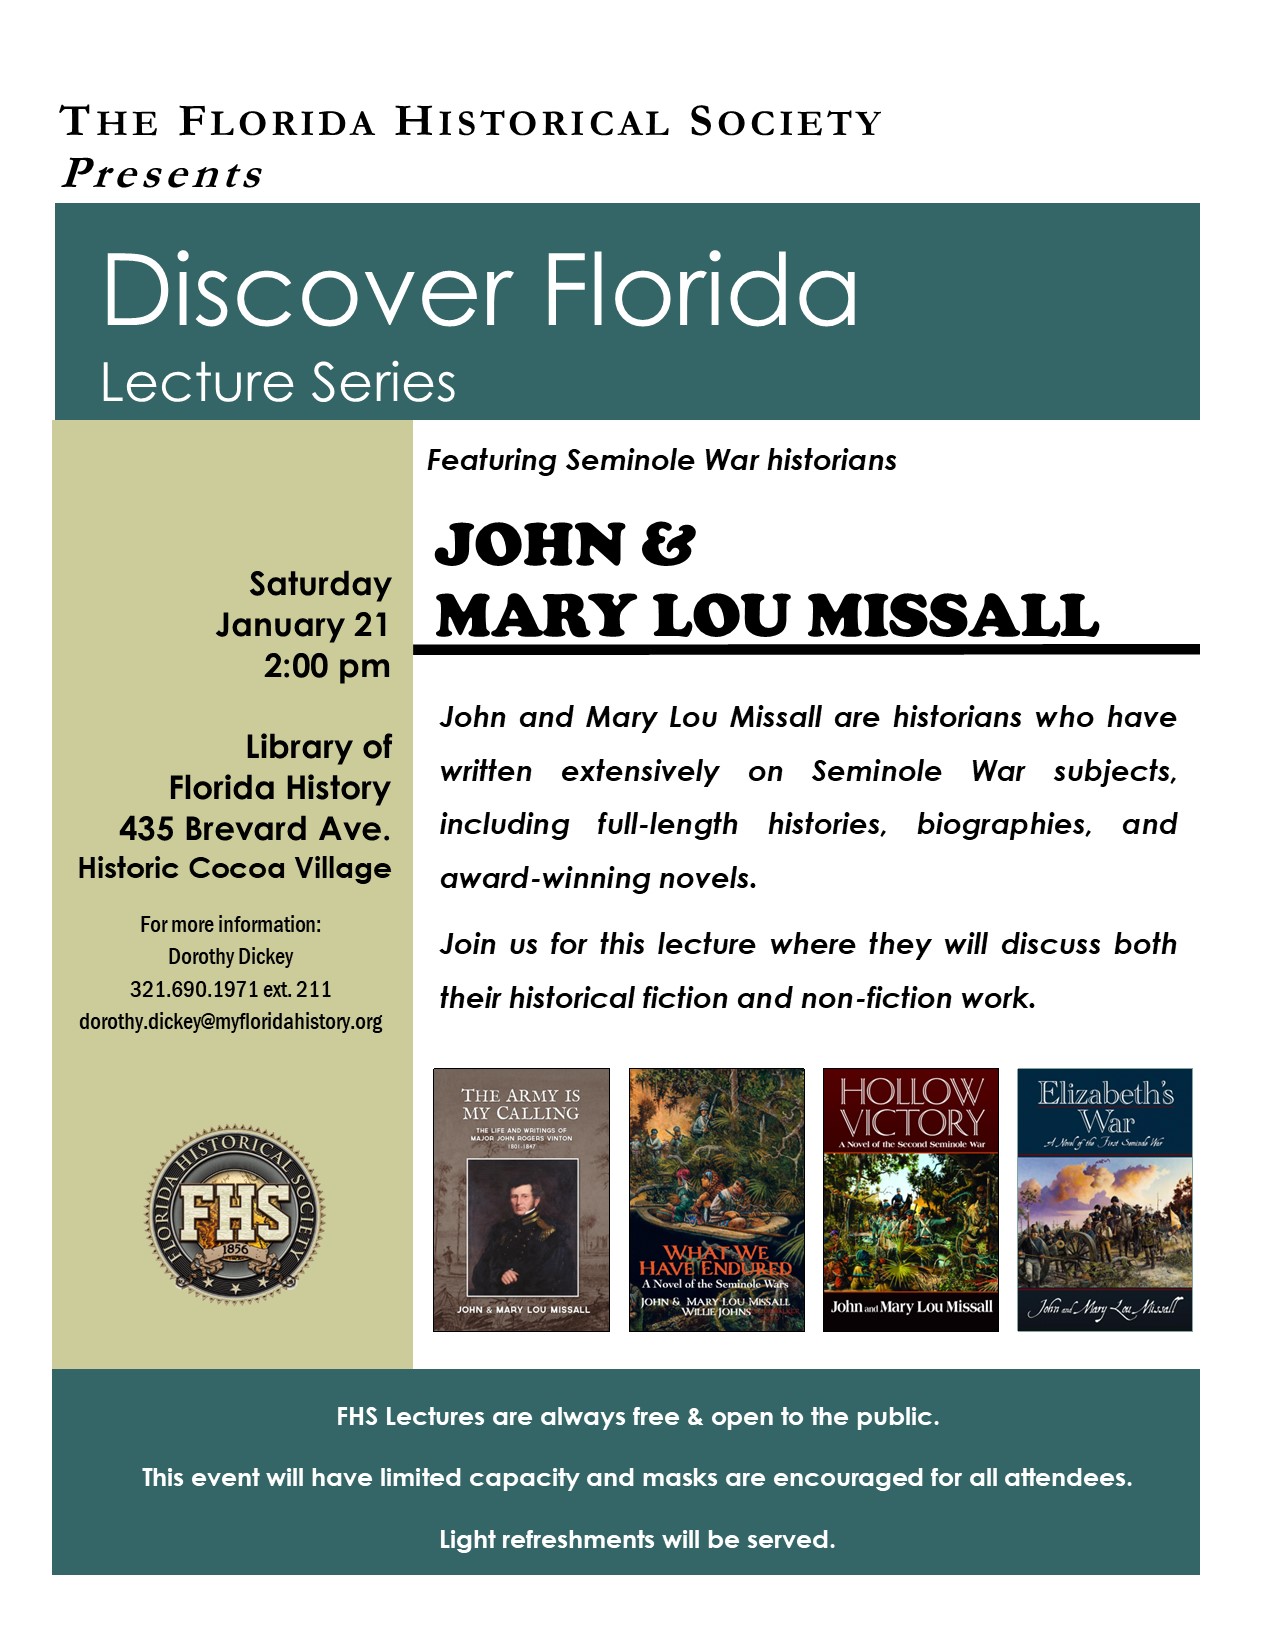 John & Mary Lou Missall Lecture